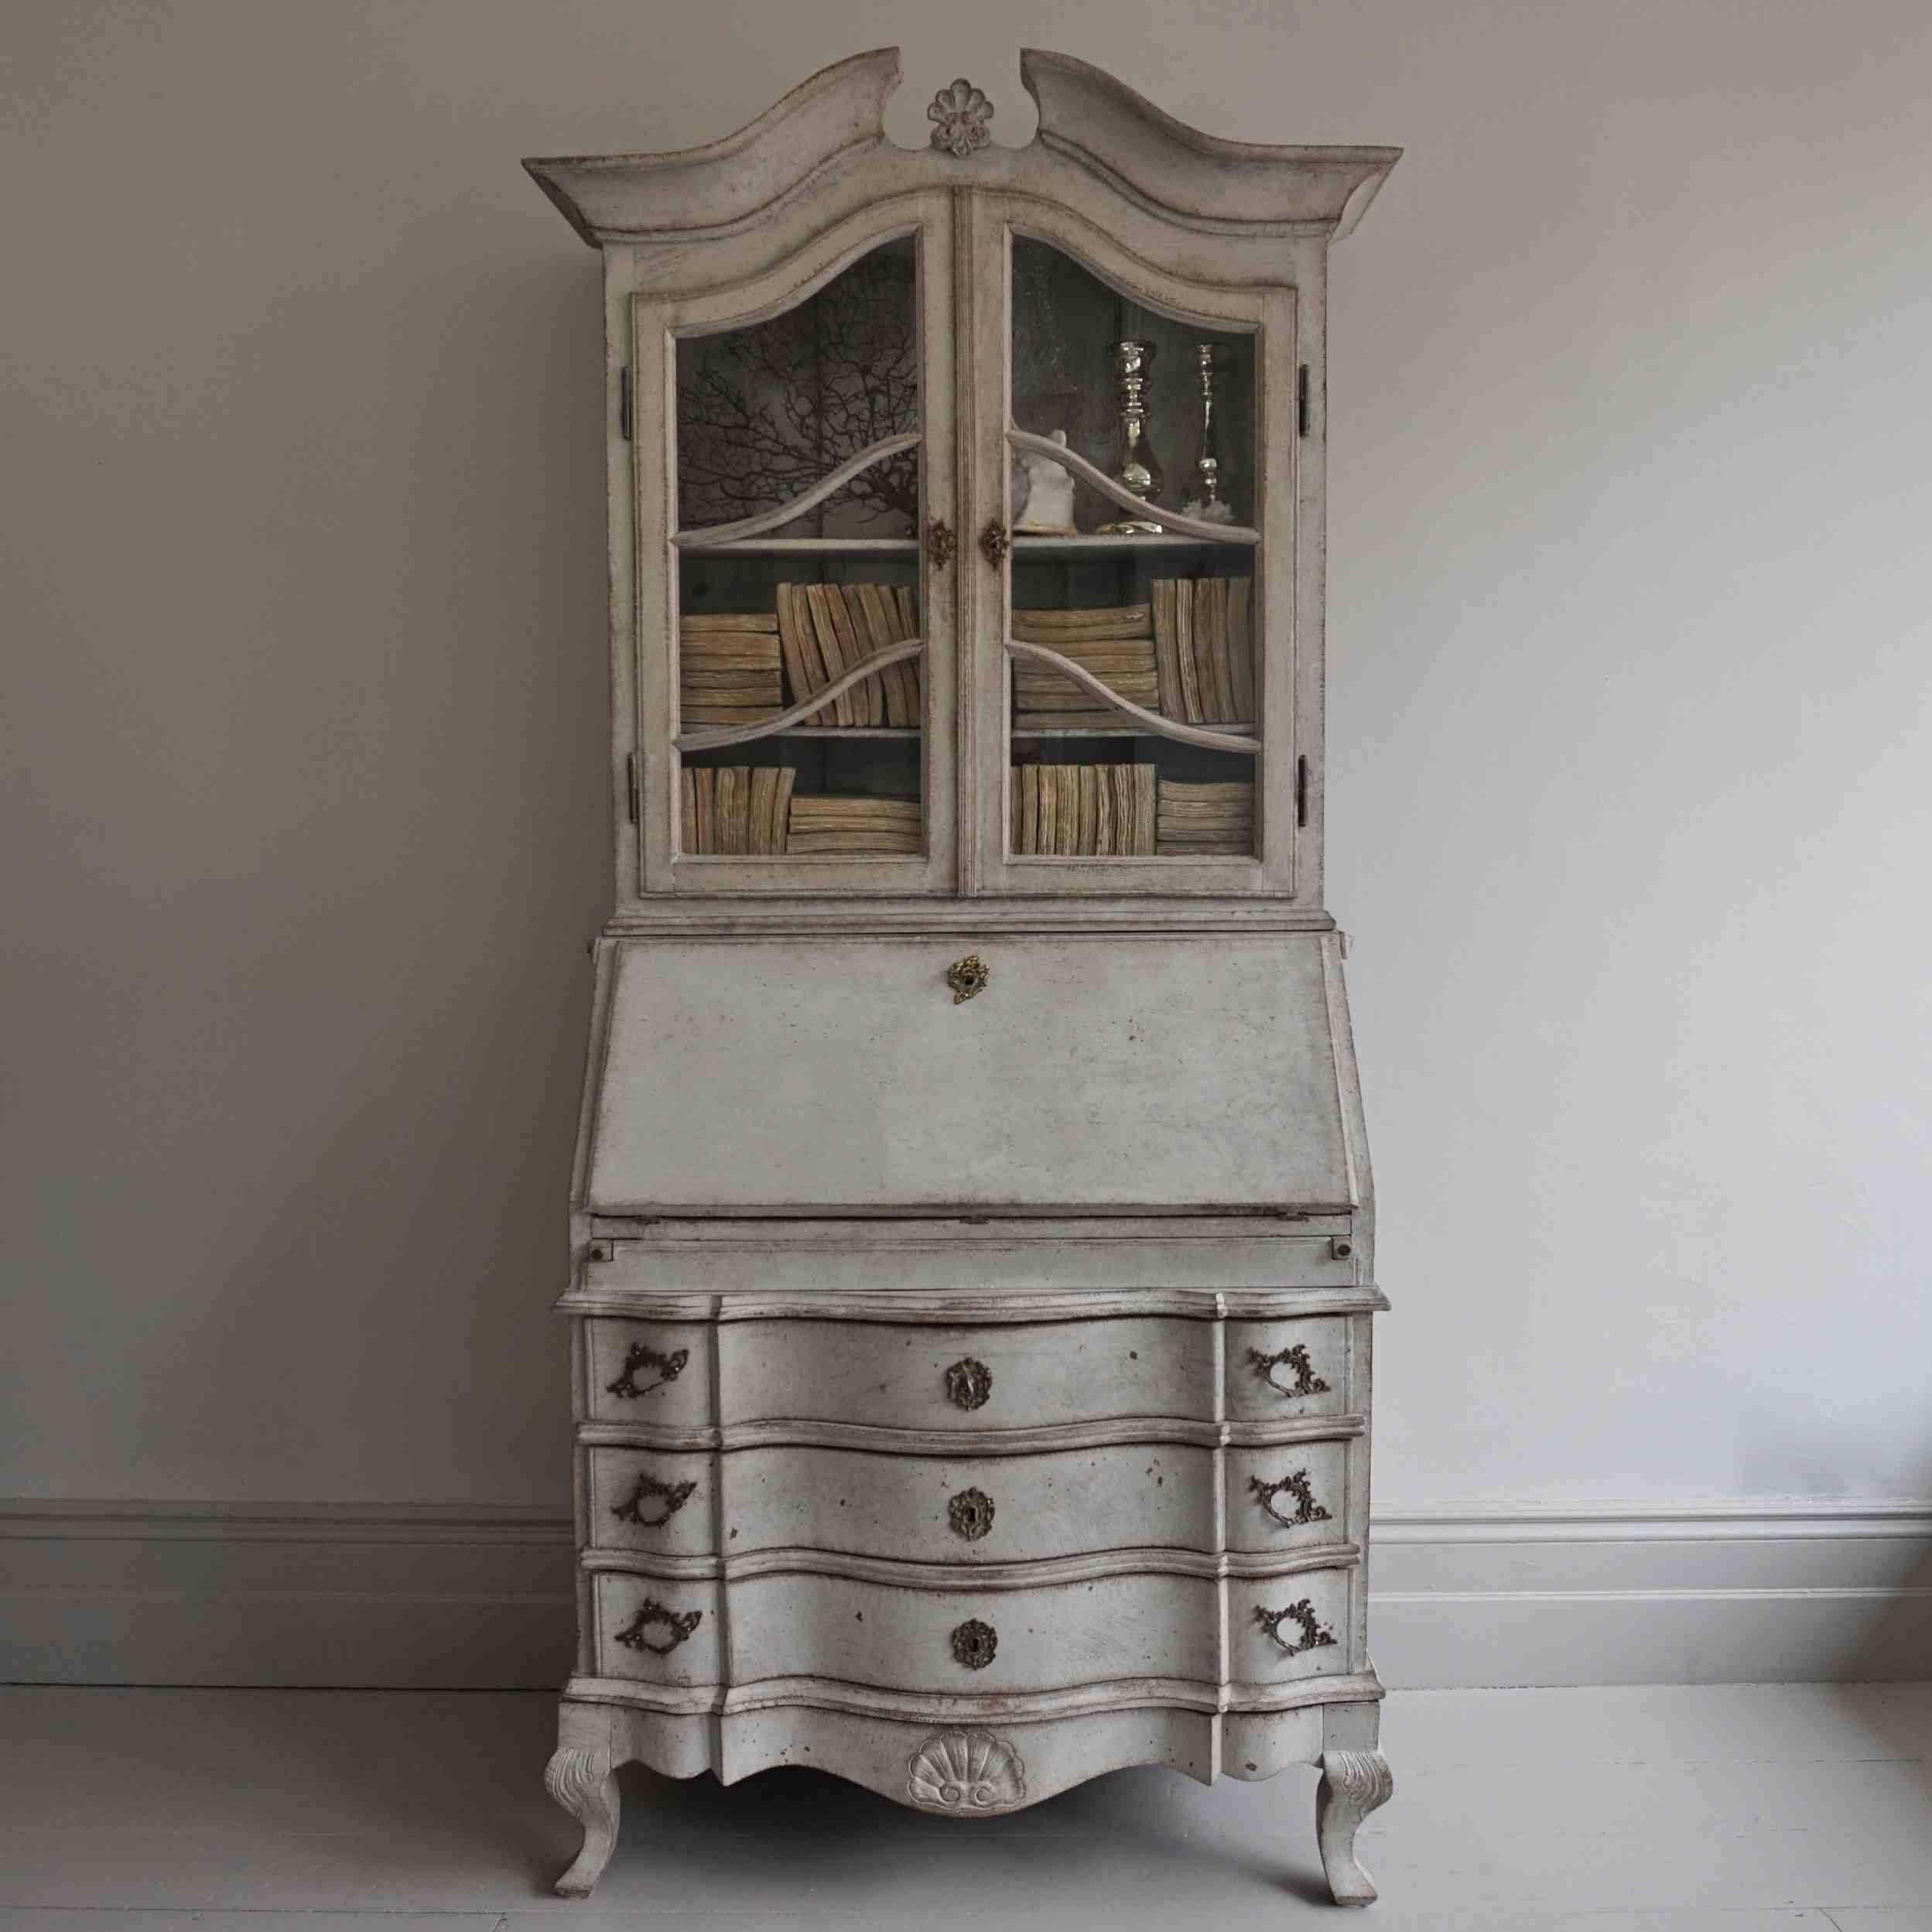 An exceptional 18th century Swedish Rococo secretraire with beautiful shaped glass vitrine bookcase and hand-carved serpentine drawers, Danish, circa 1760.

Continental US shipping:
We ship to the United States quickly and safely using FedEx